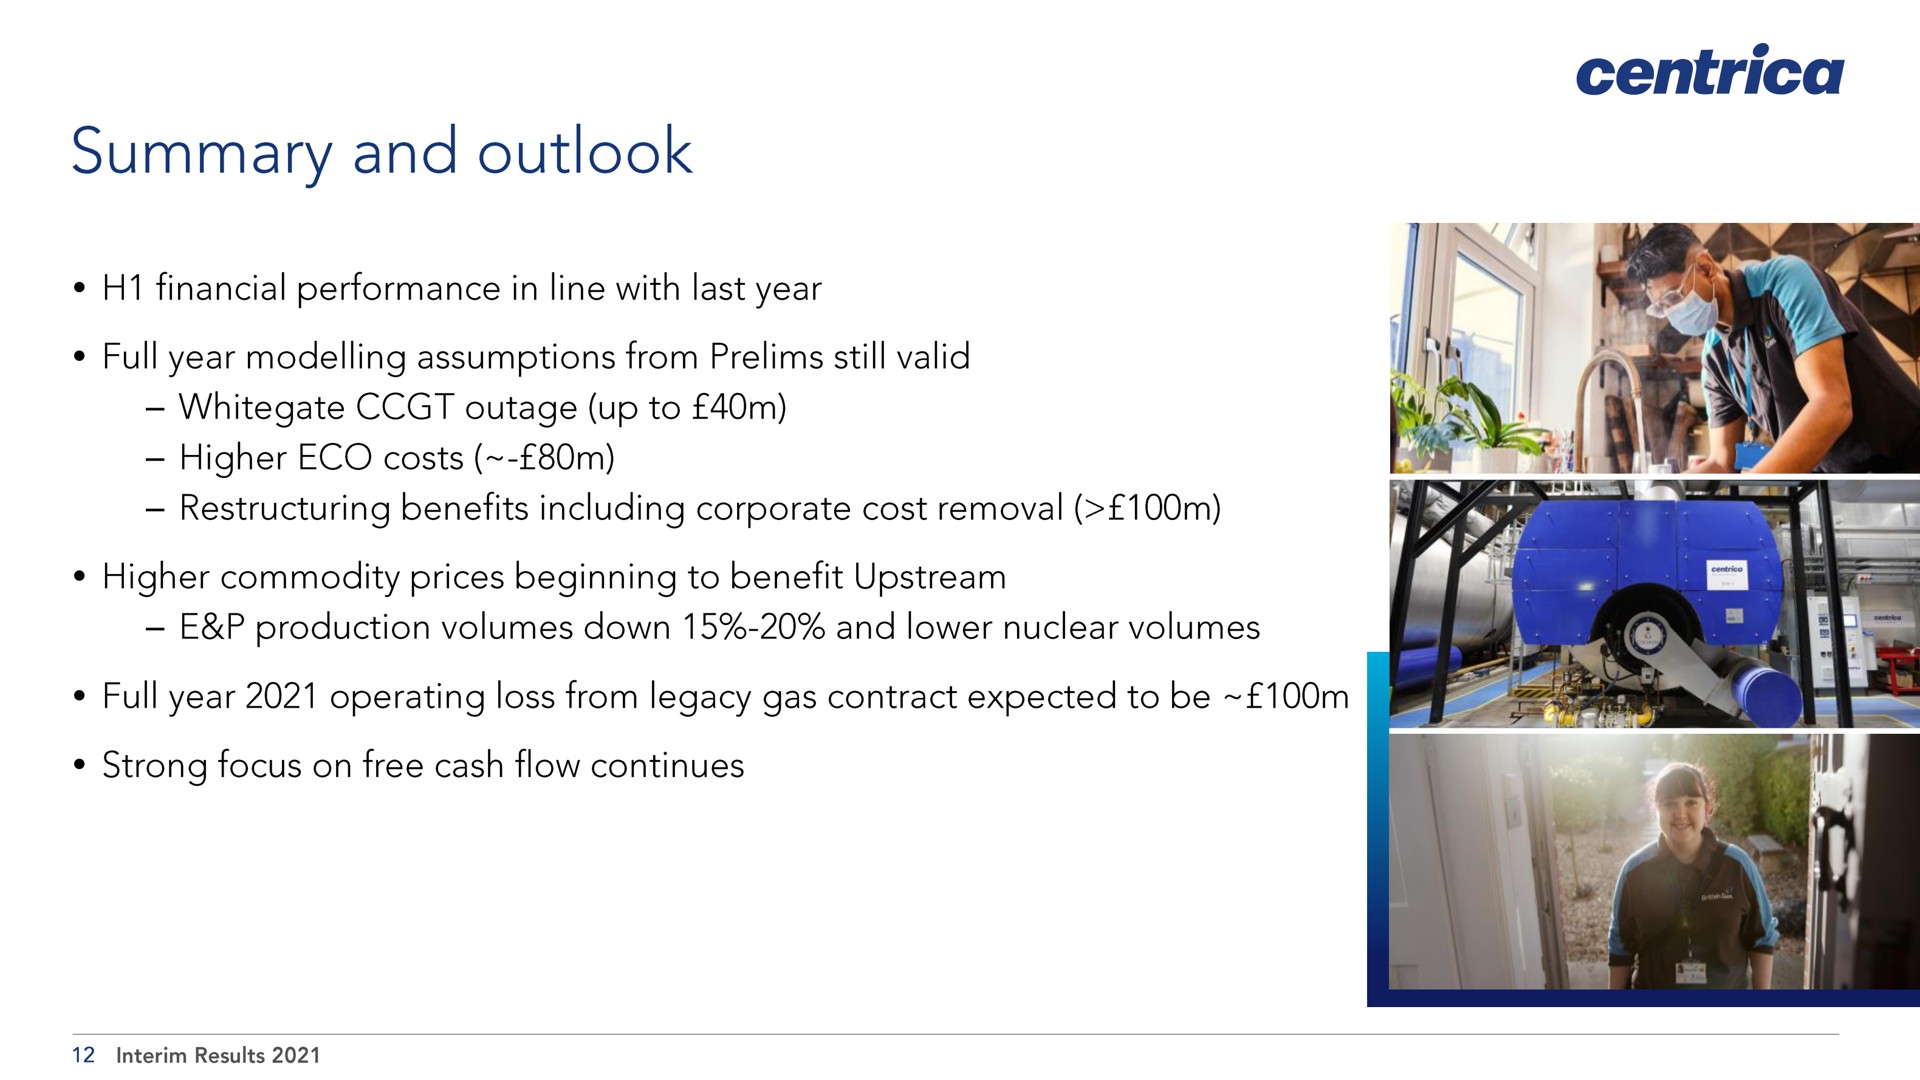 summary and outlook | Centrica